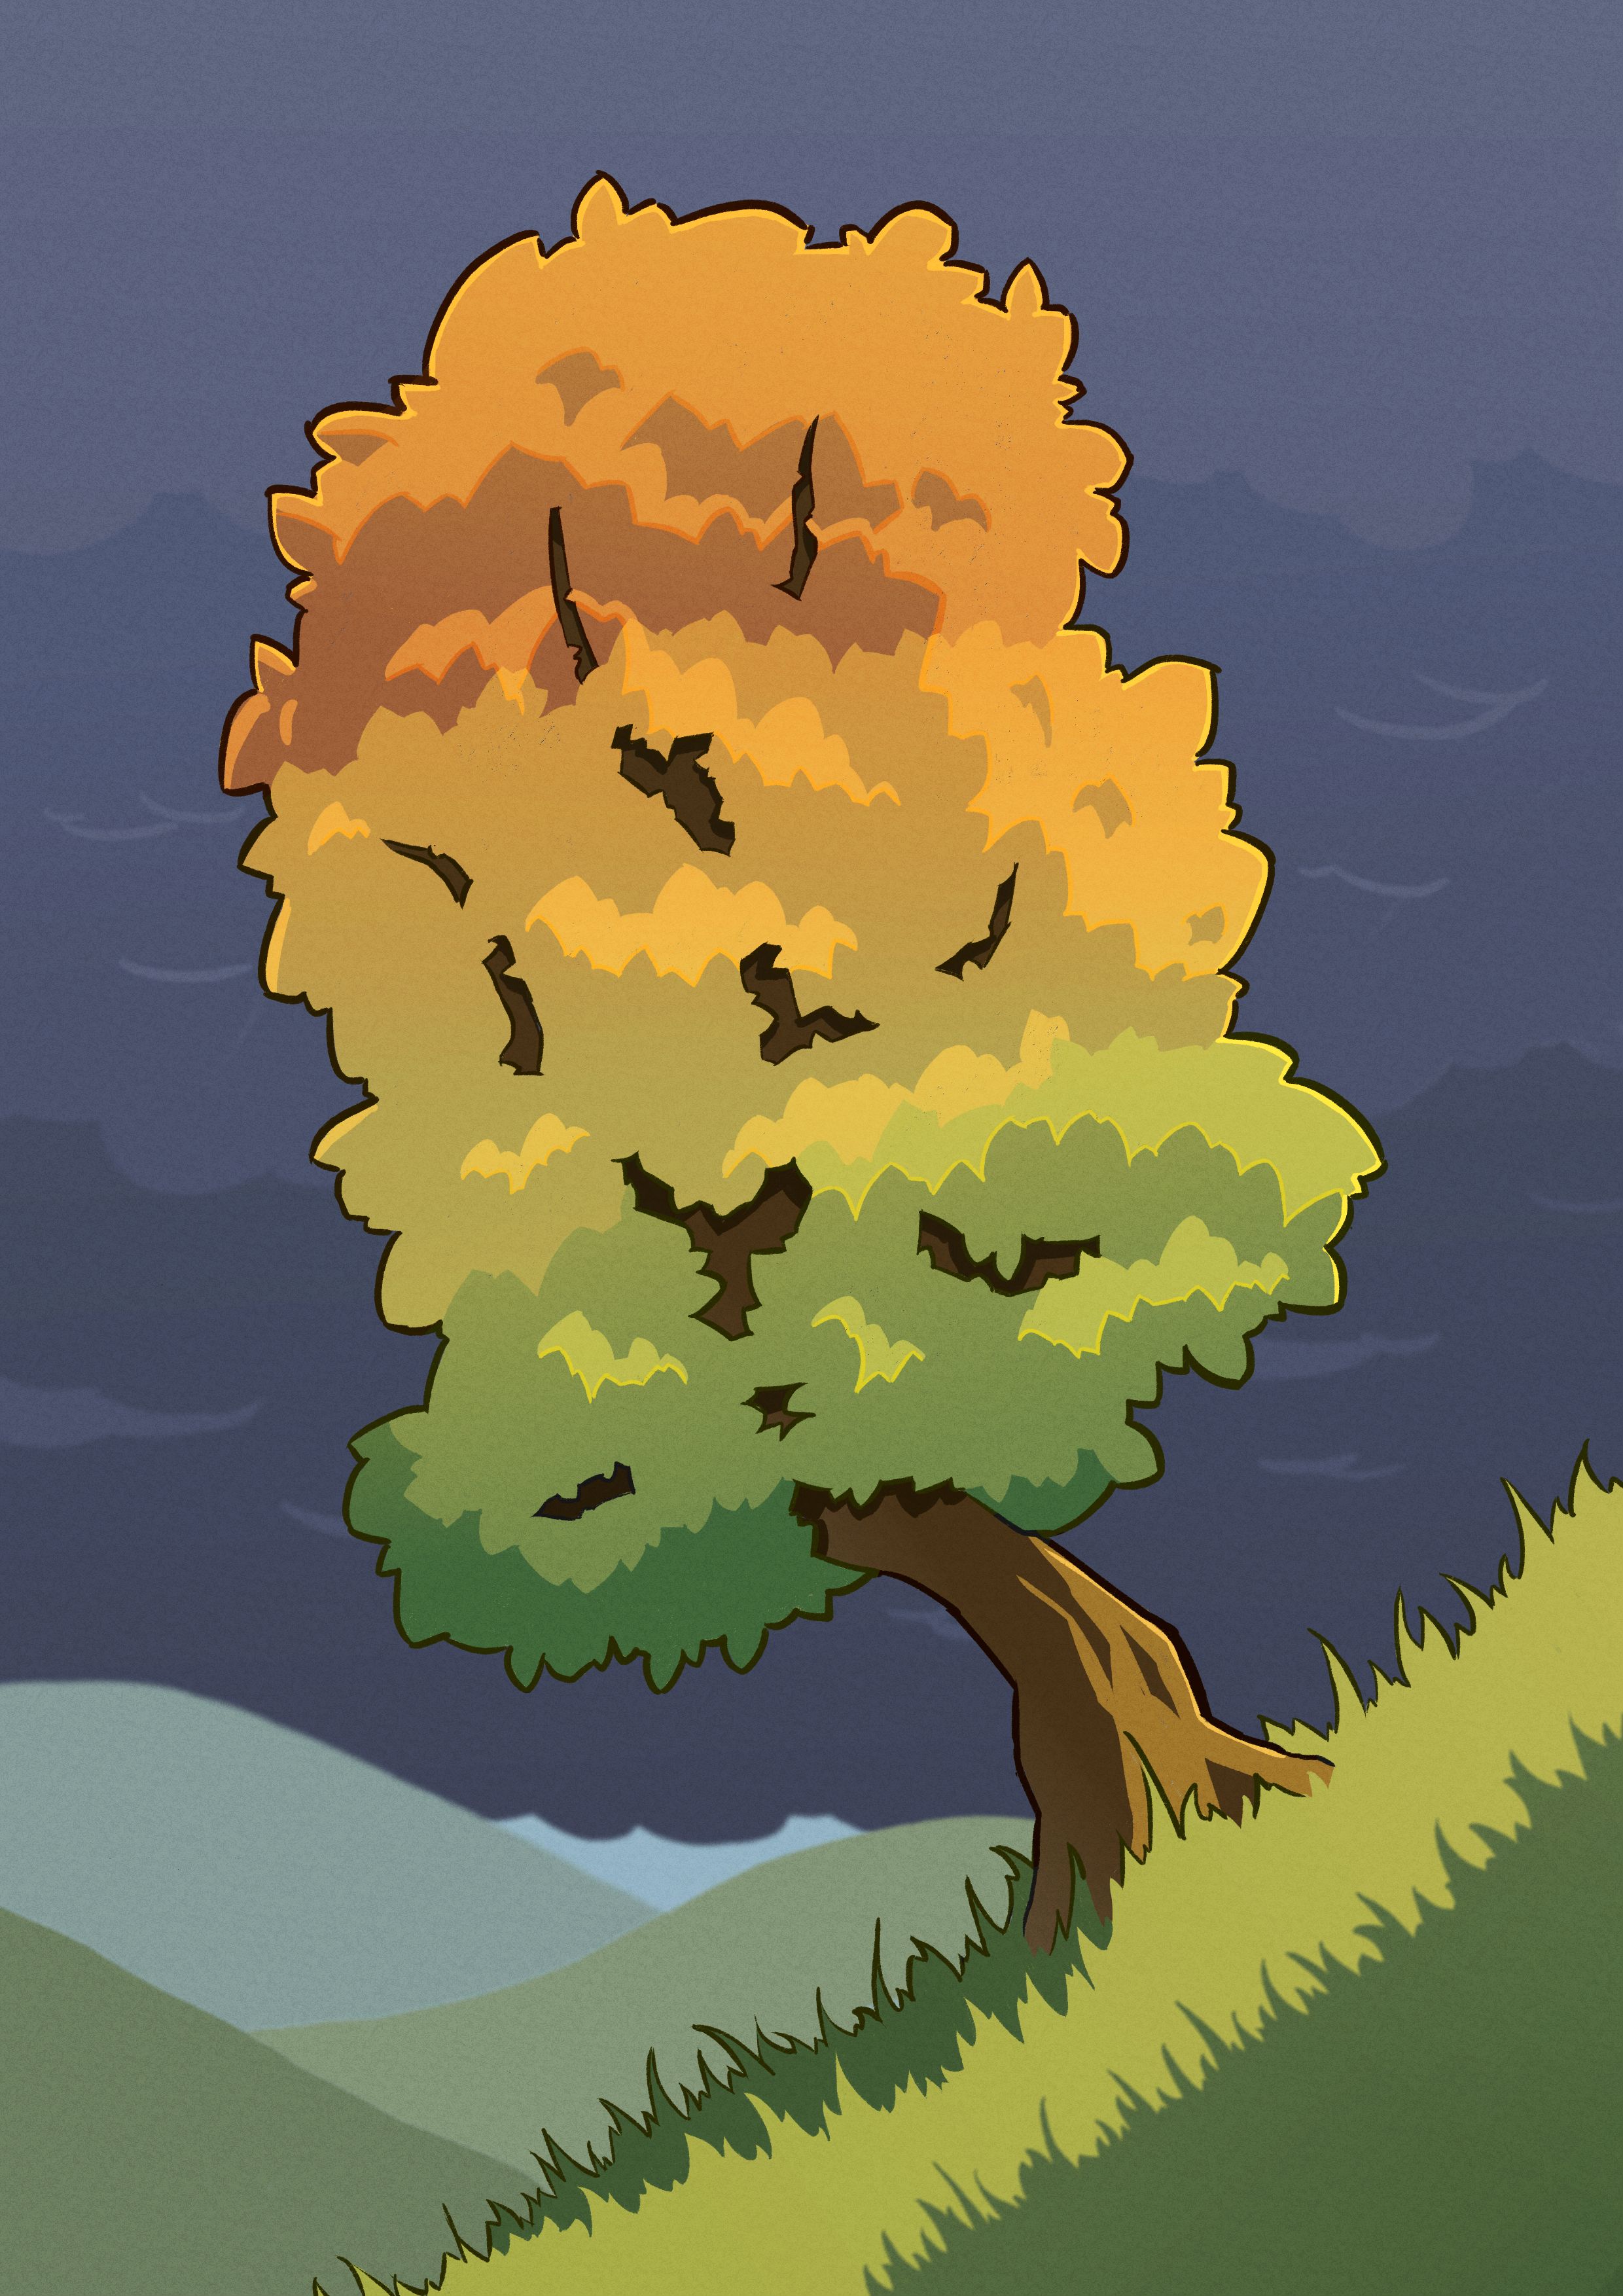 A digital drawing of a leafy tree standing on a steep slope
in warm orange sunlight. Its leaves are in the process of changing color, with
red on top, yellow in the middle, and green at the bottom. Behind it are some
rolling hills and the dark clouds of an oncoming thunderstorm.